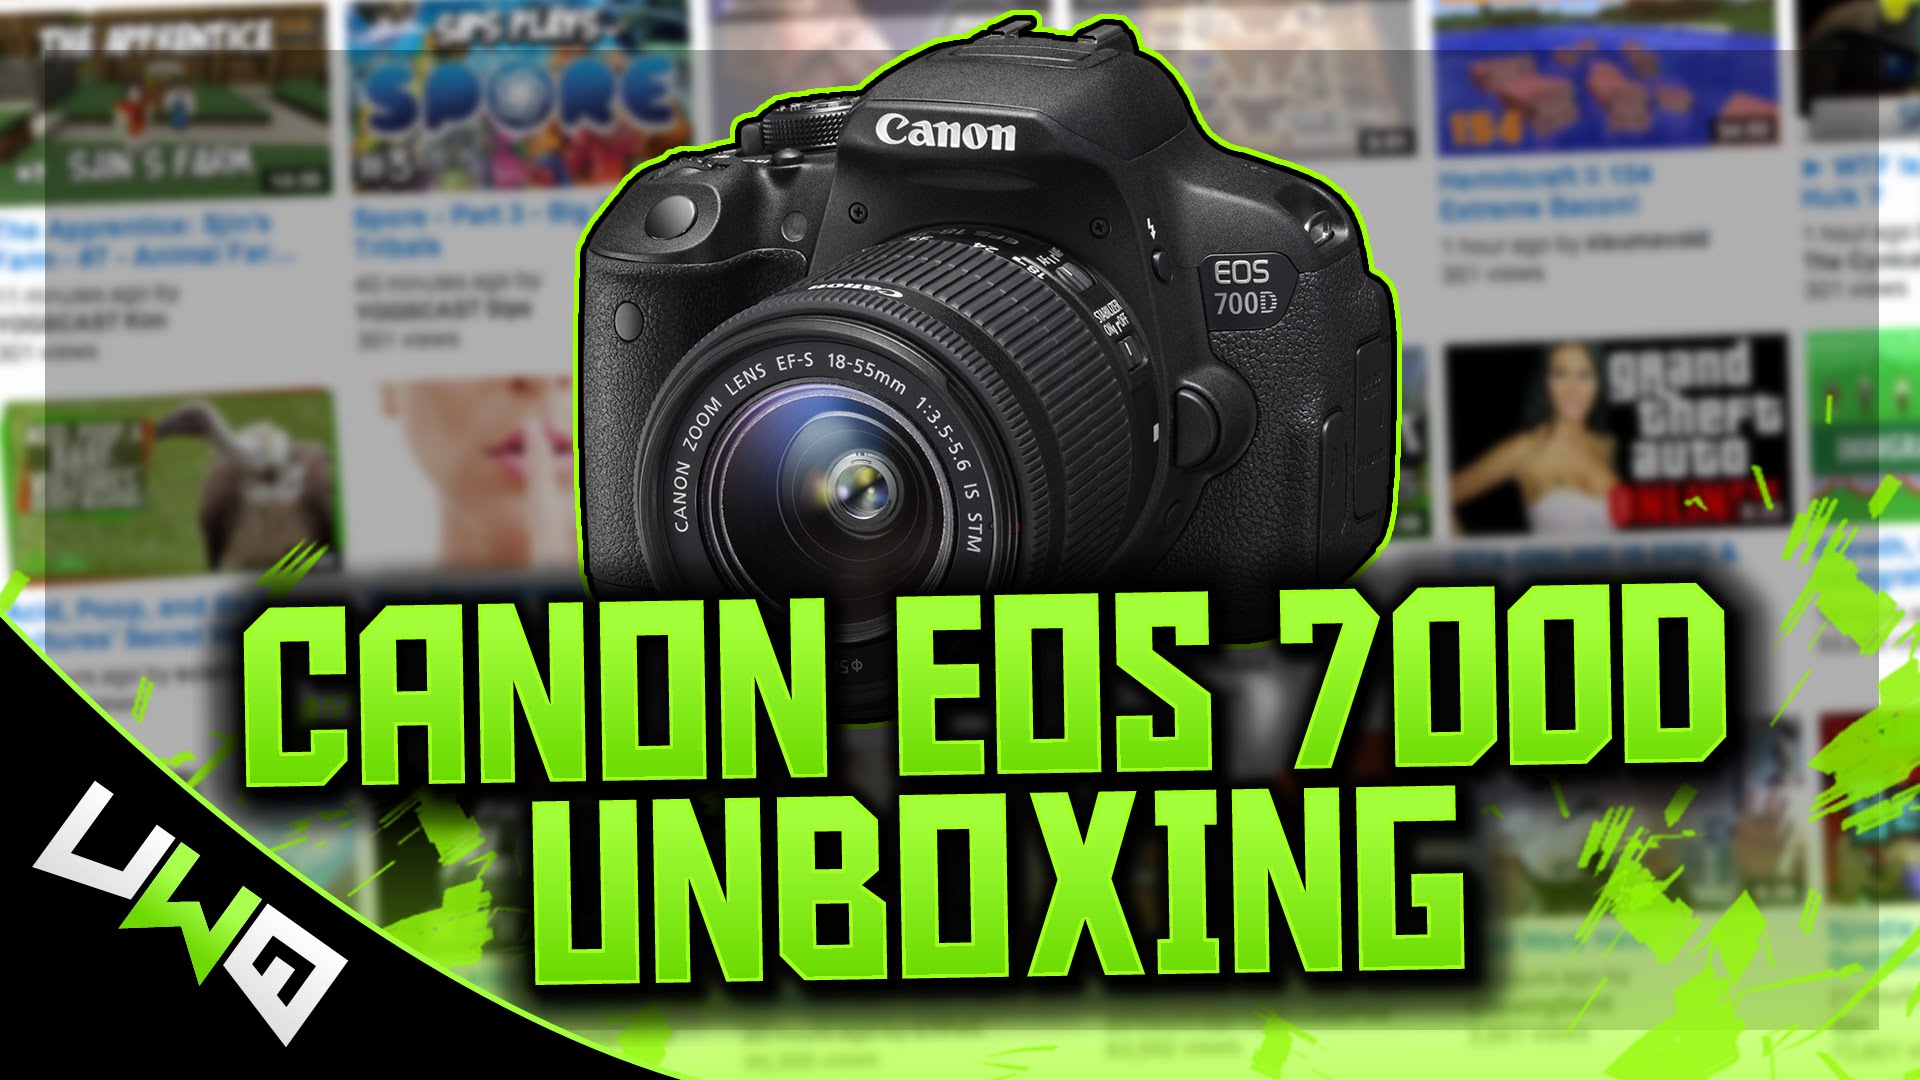 Canon EOS 700D (FUNNIEST UNBOXING EVER) – My New Camera